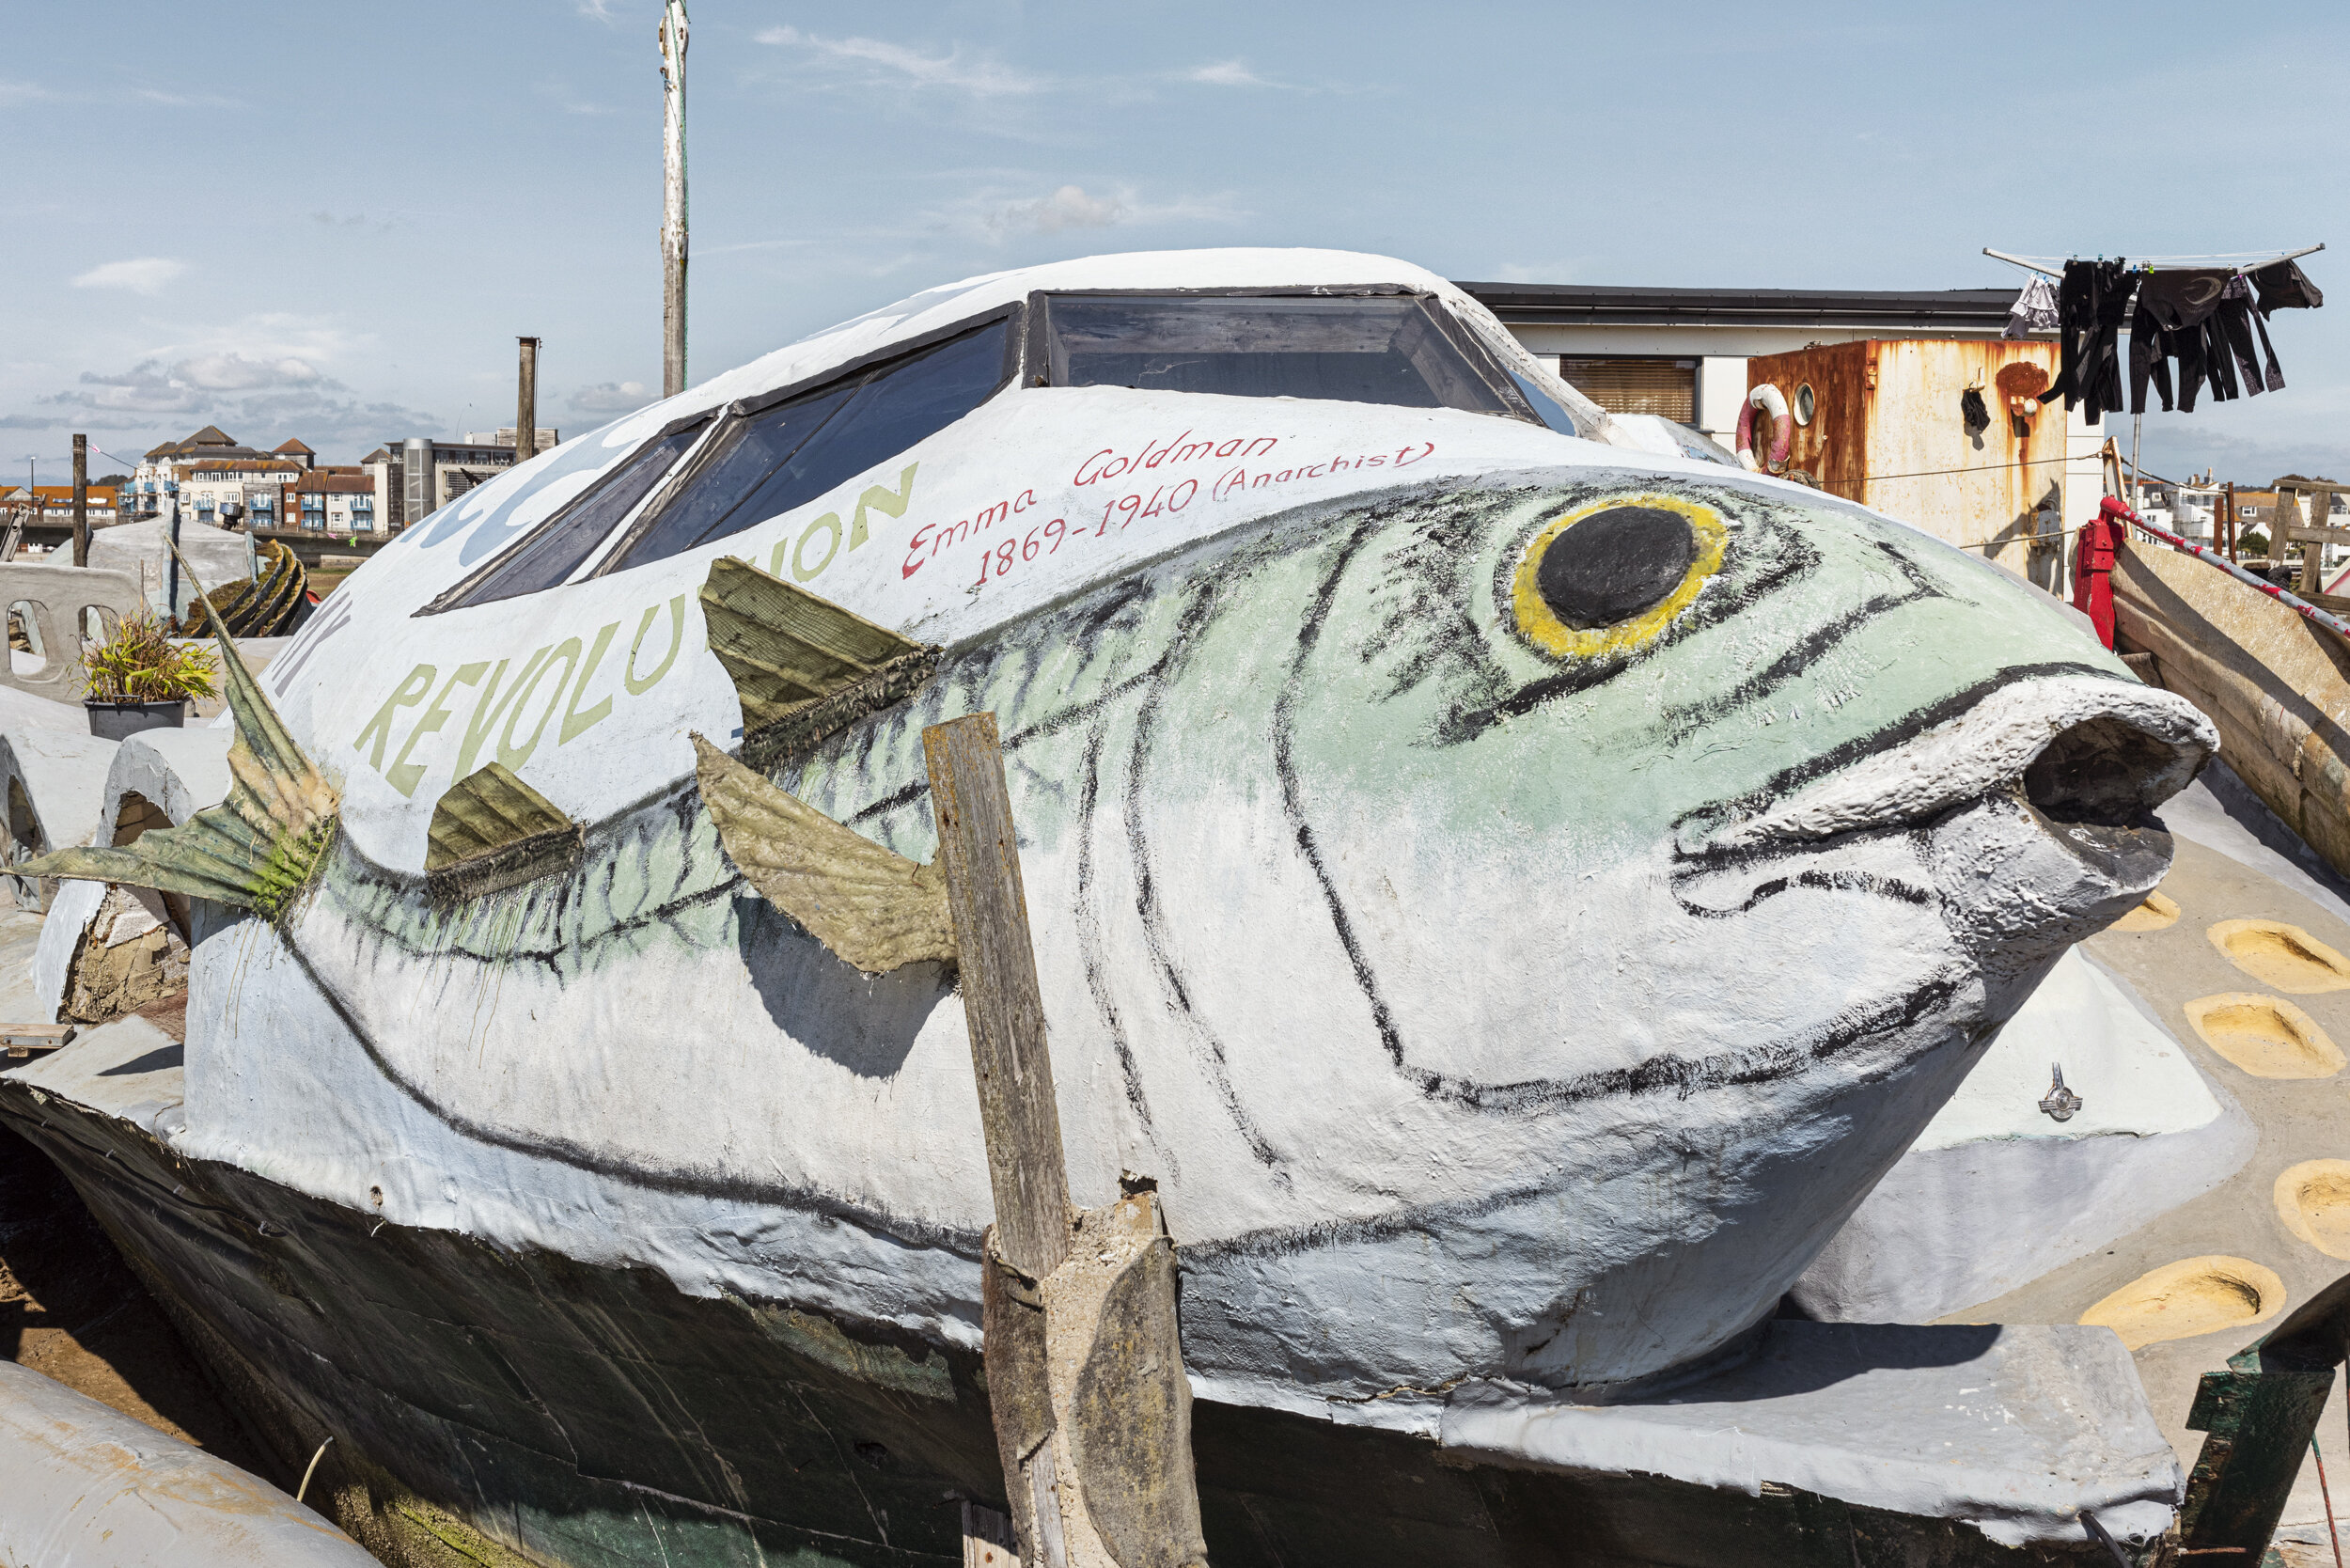 12 Shoreham Boatyard - Shoreham by Sea - East Sussex - Hamish McKenzie - The Keepers Project - David Clegg -Thierry Bal.jpg